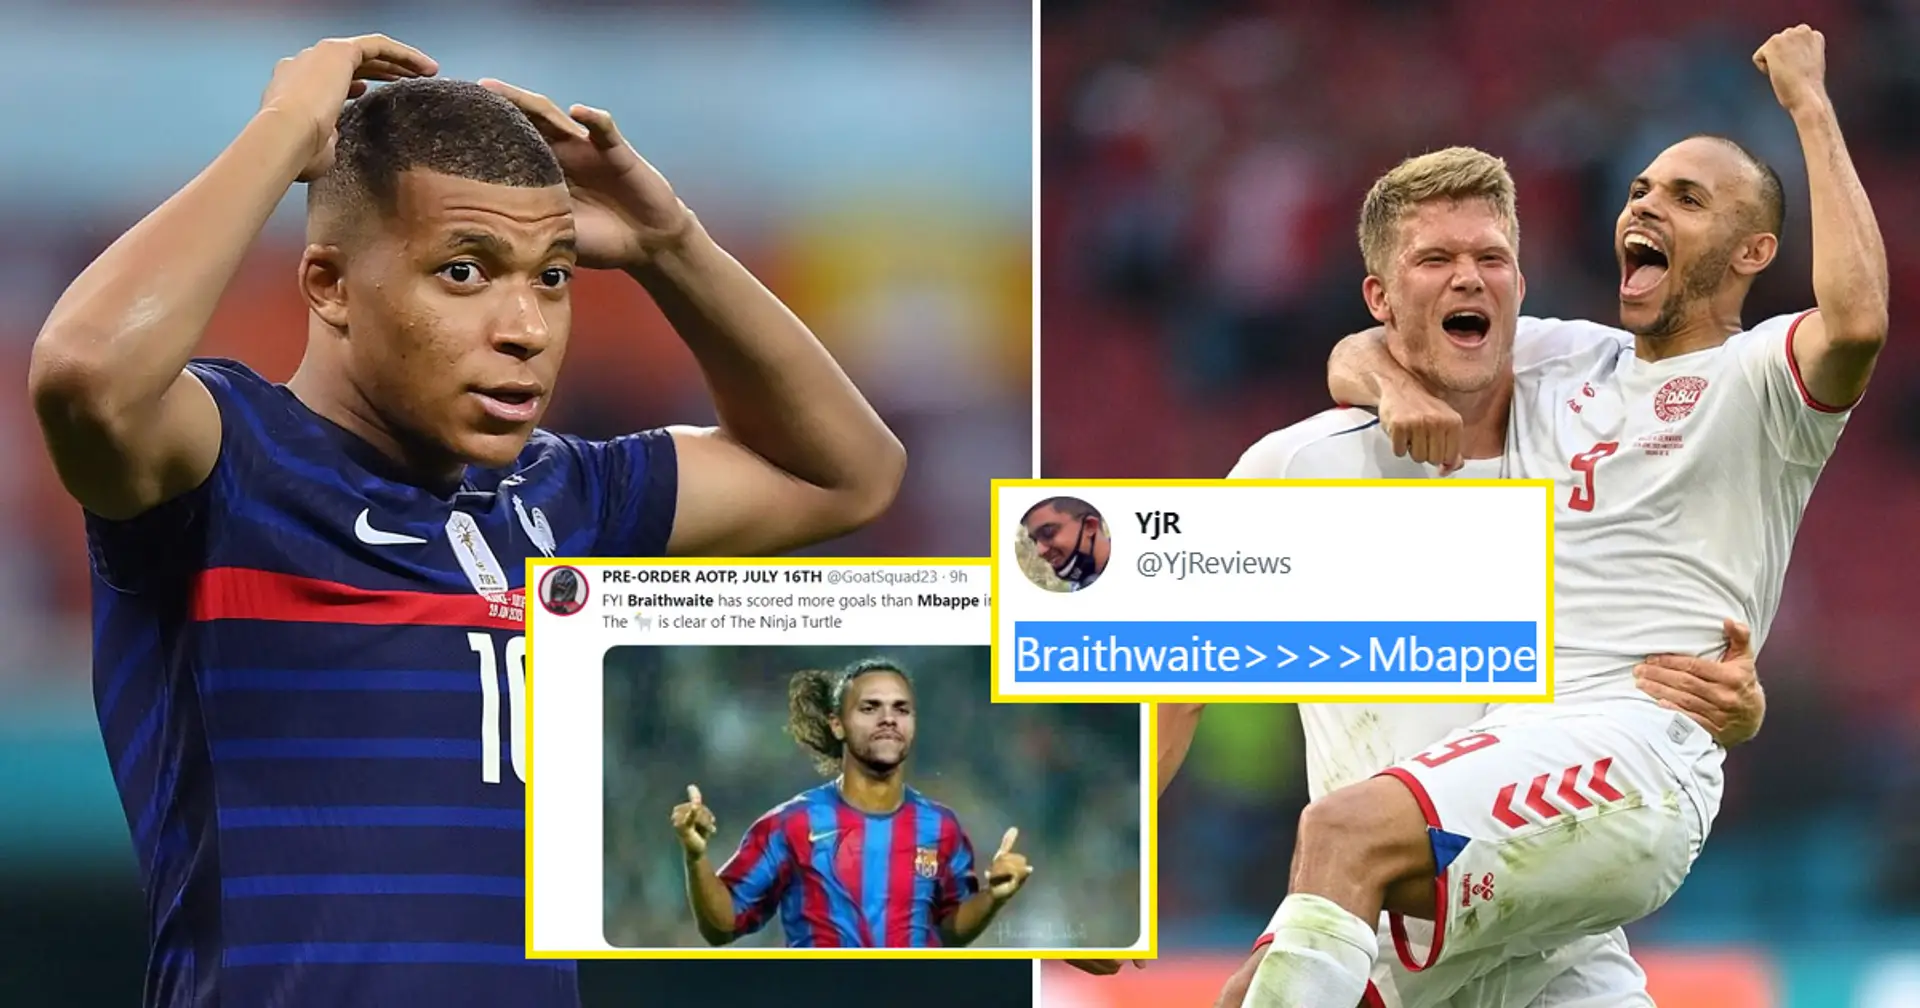 'Mbappe is a private school version of Braithwaite': Fans troll Kylian as Barca benchwarmer outscores PSG striker at Euro 2020